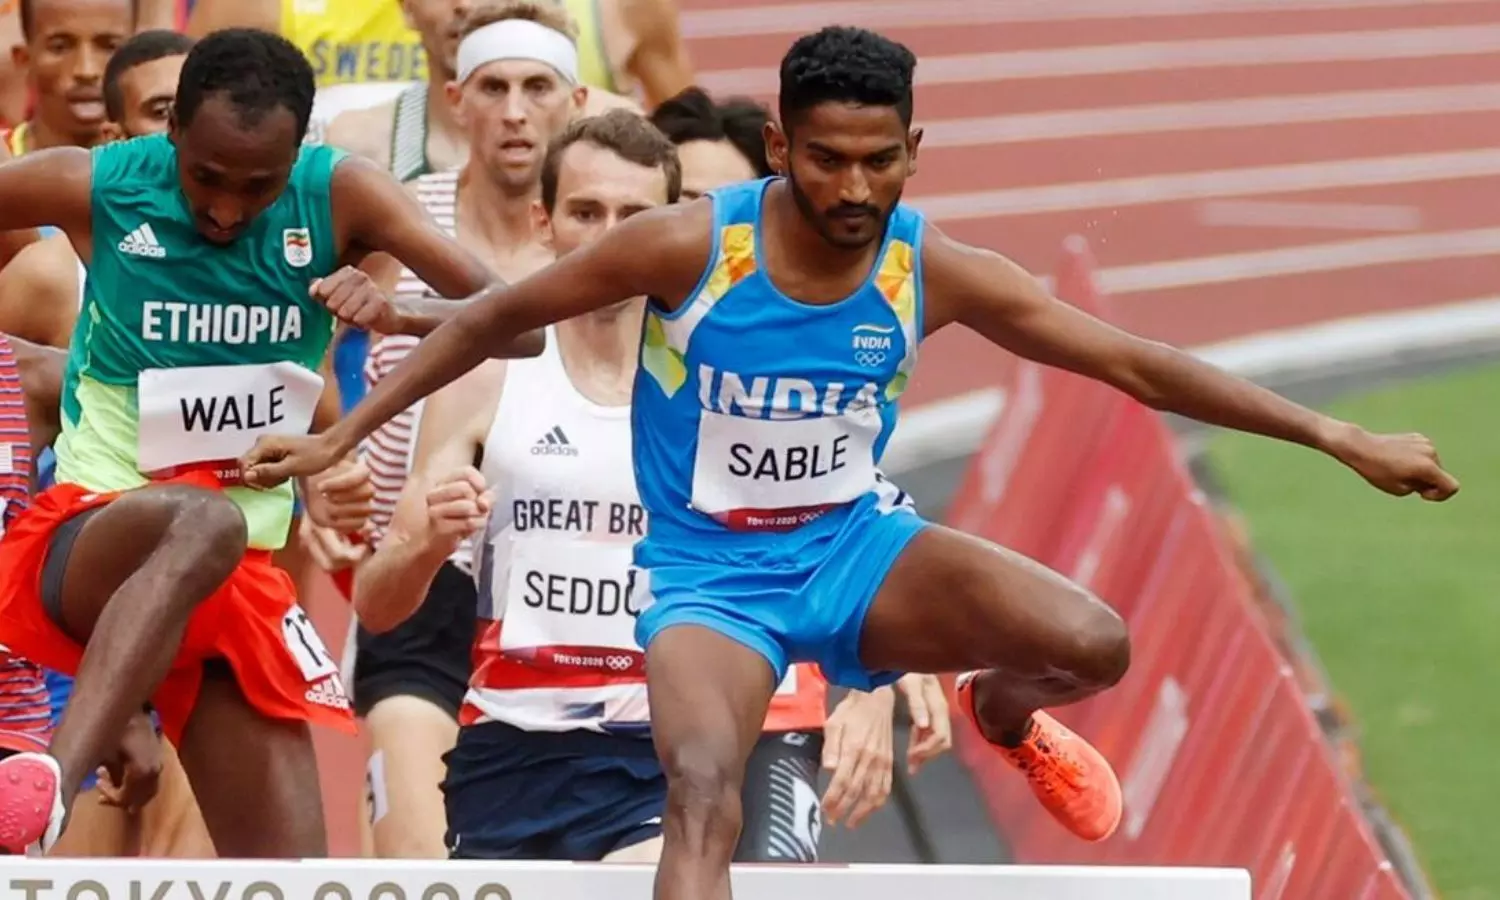 2022 World Athletics Championships Day 4 LIVE - Avinash Sable finishes 11th in Final